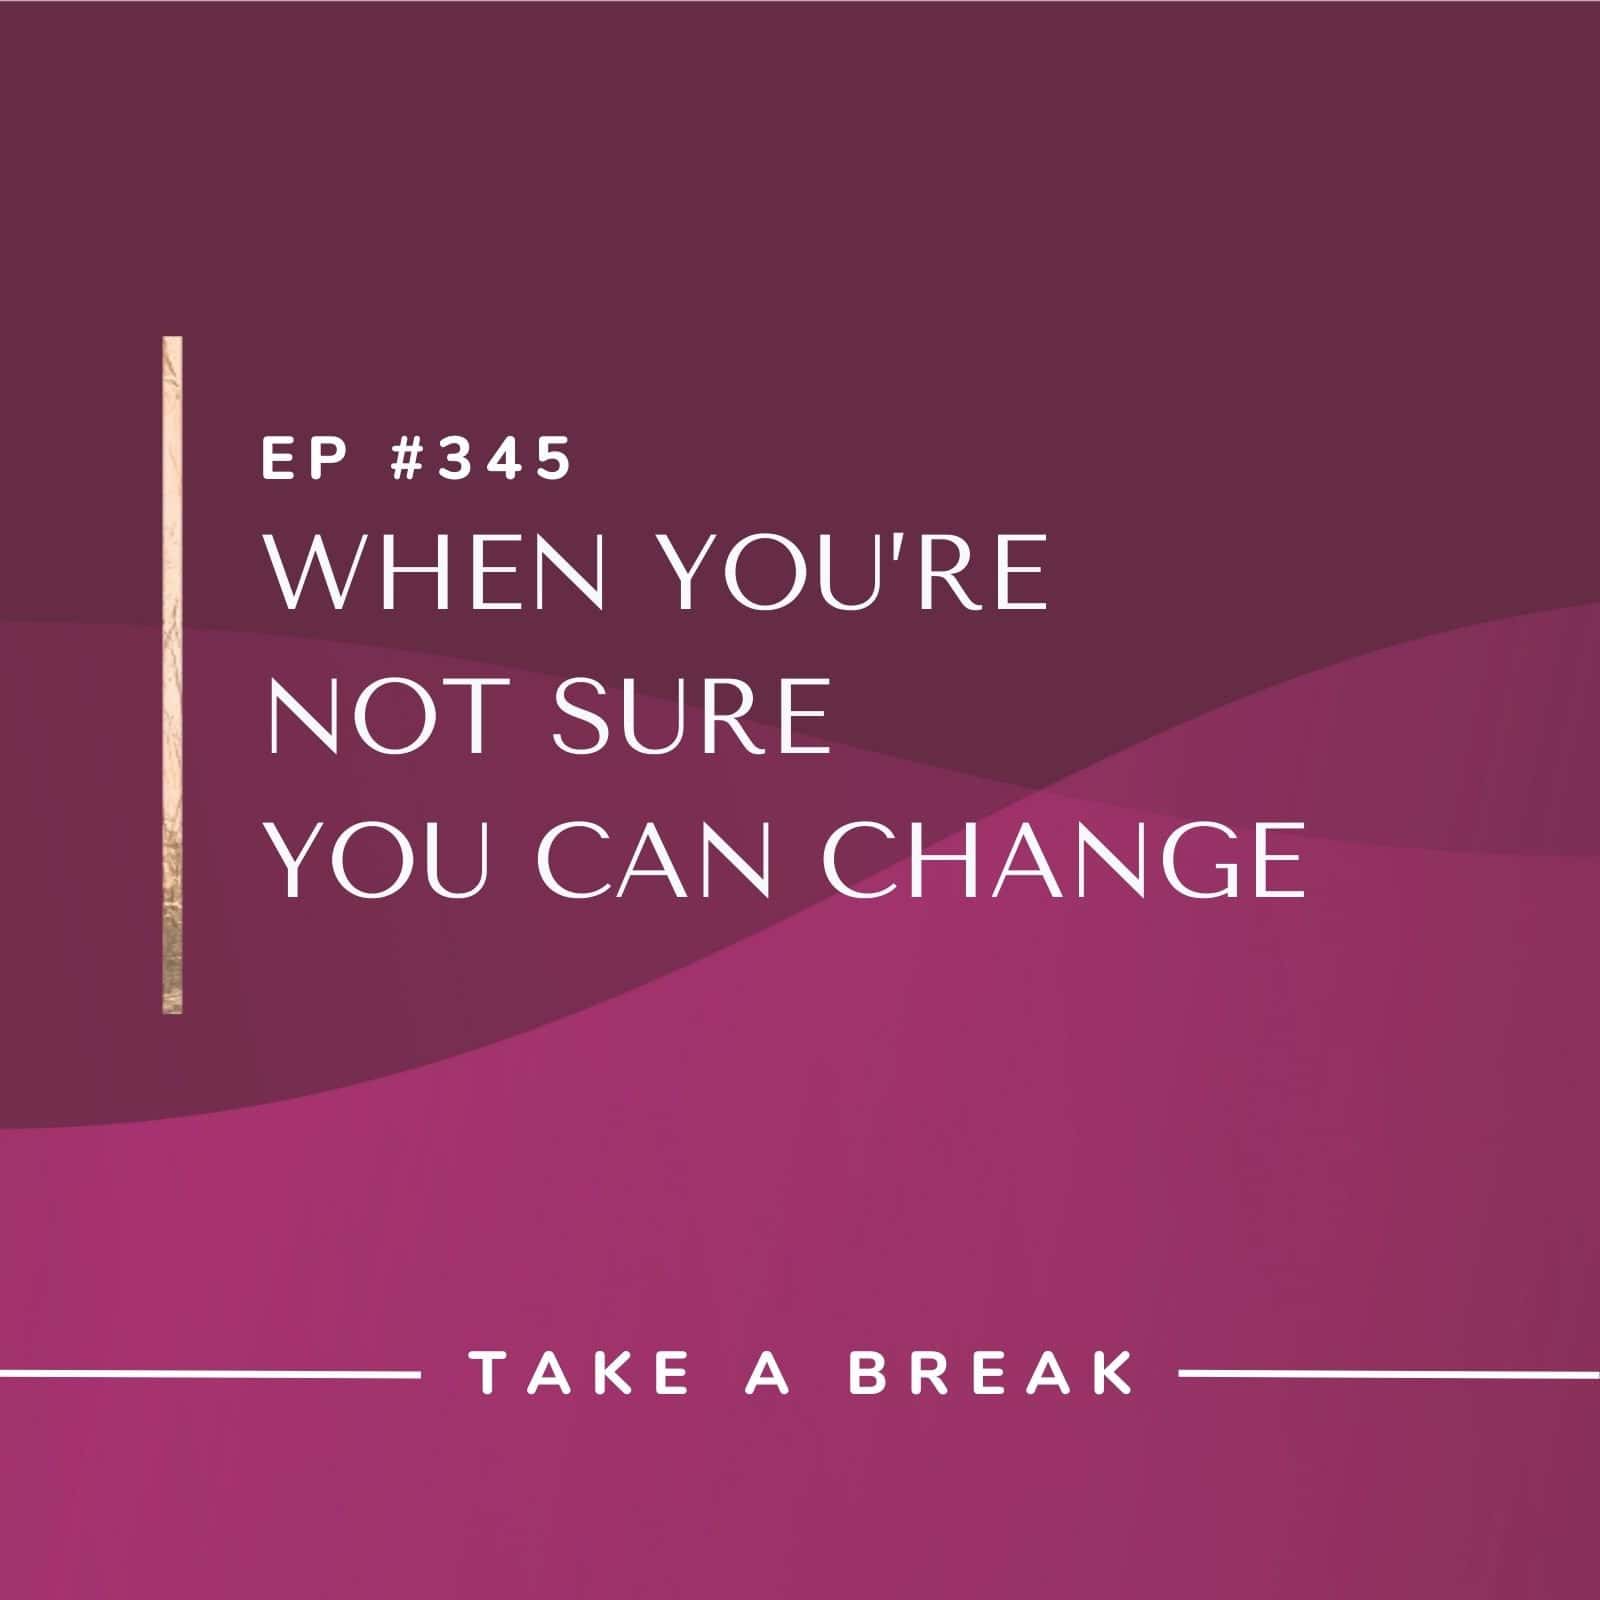 Take A Break from Drinking with Rachel Hart | When You're Not Sure You Can Change